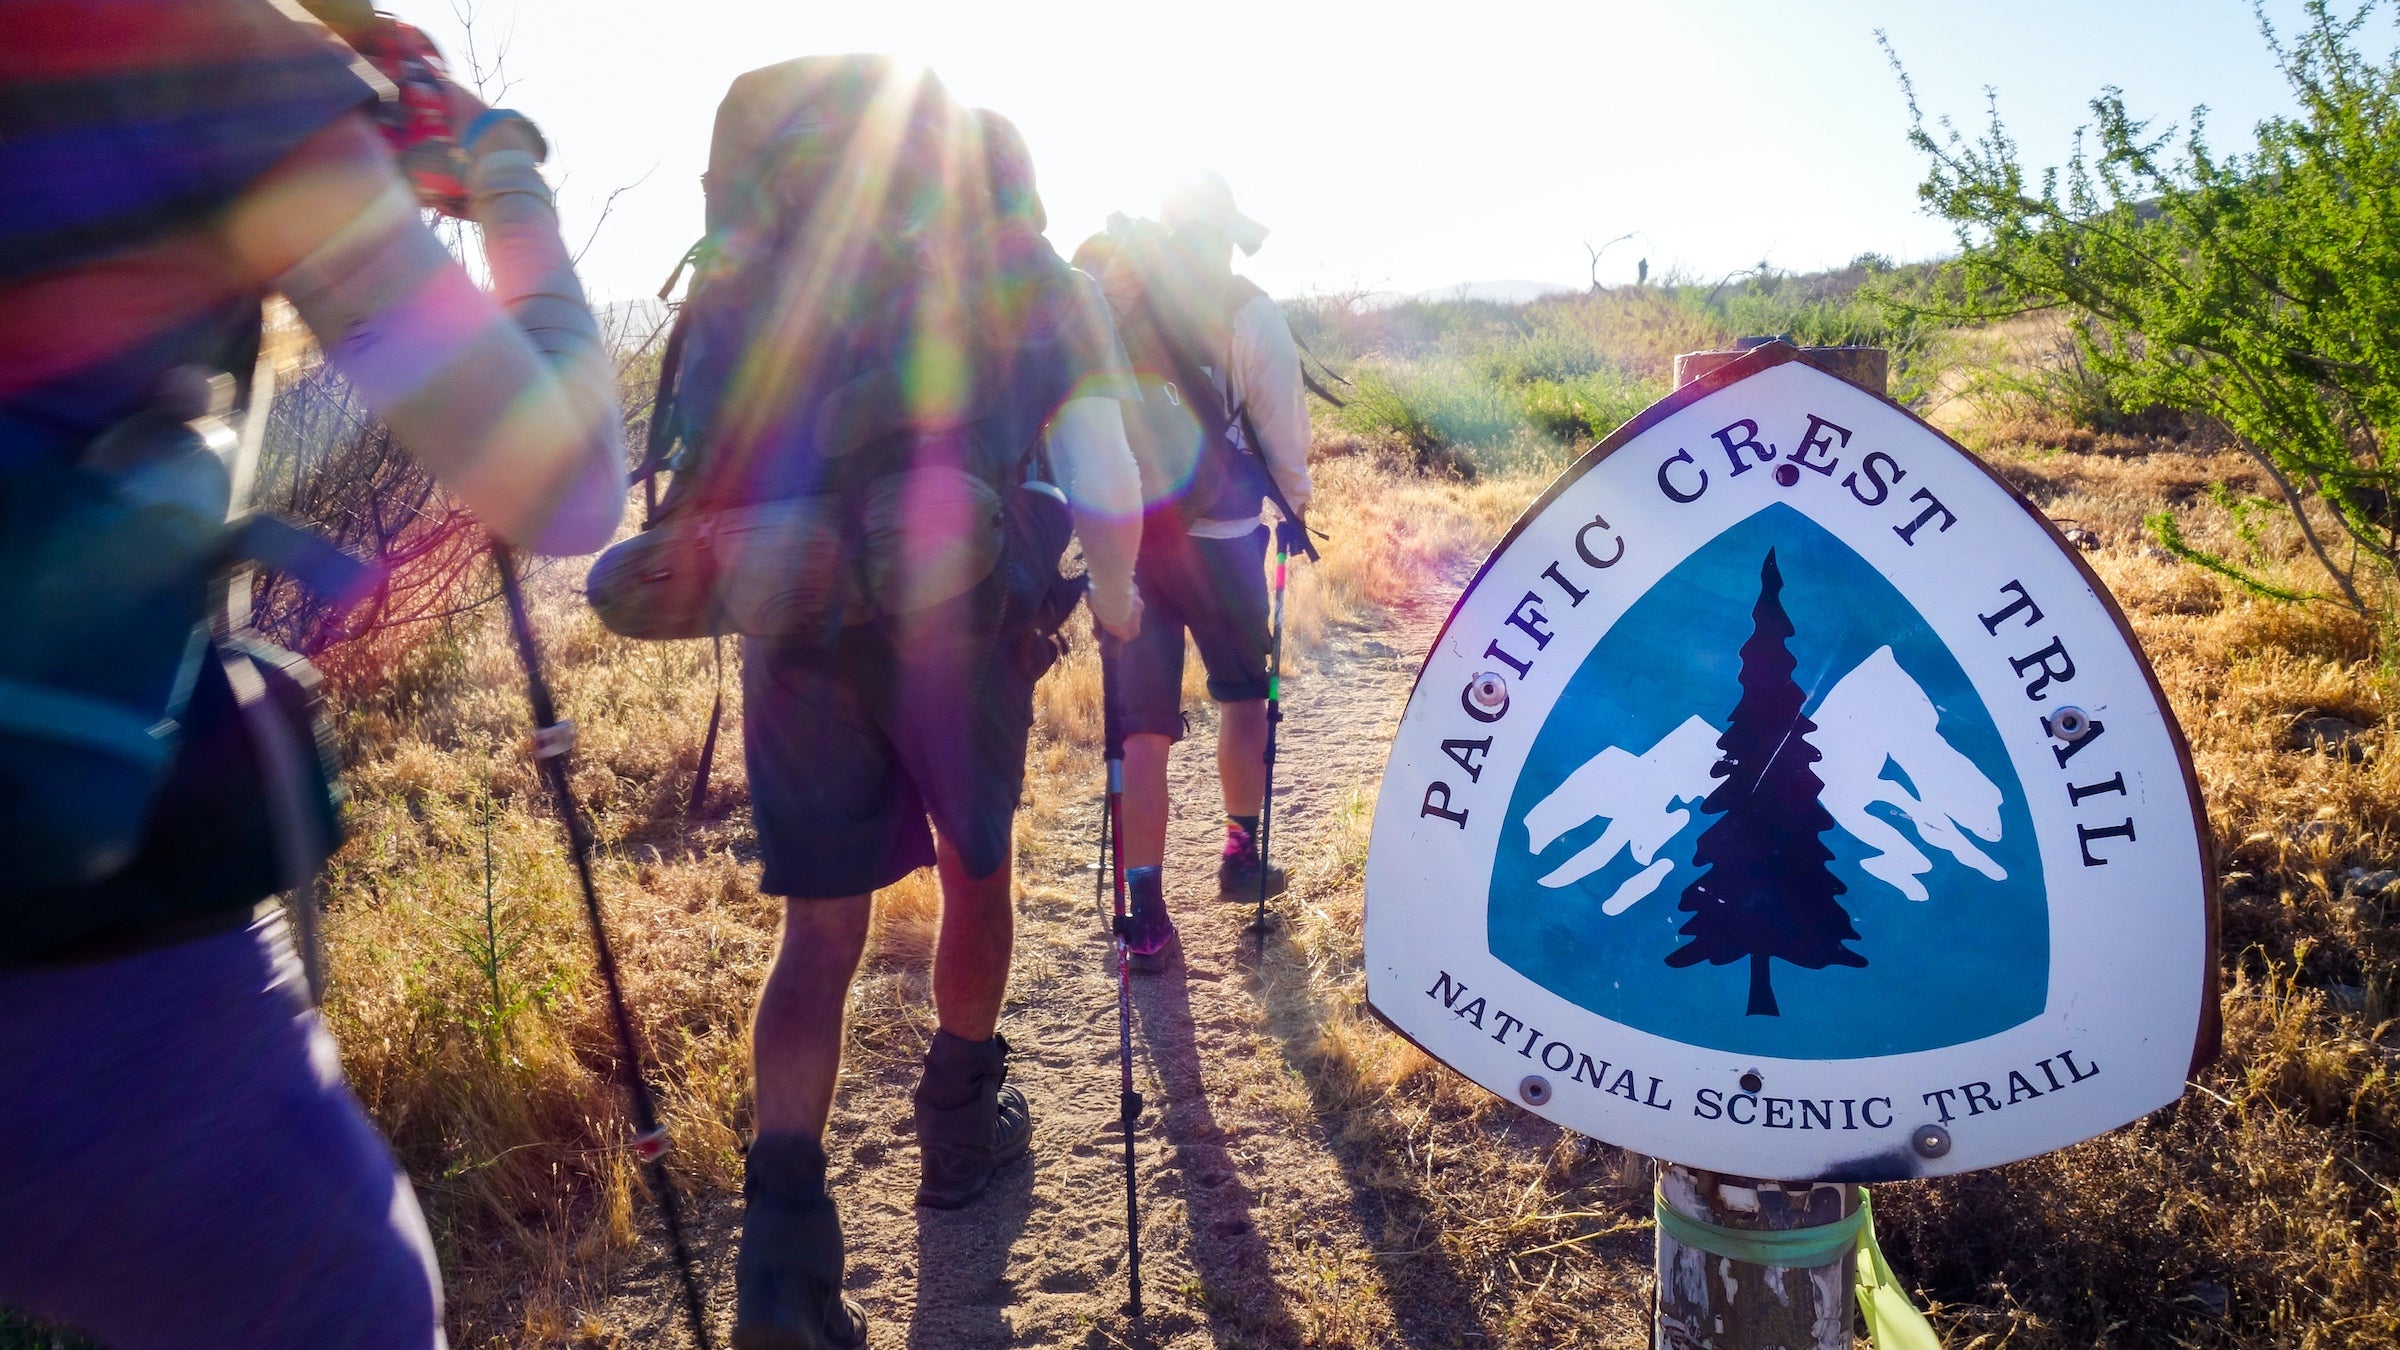 The Pacific Crest Trail Gear Guide for 2024